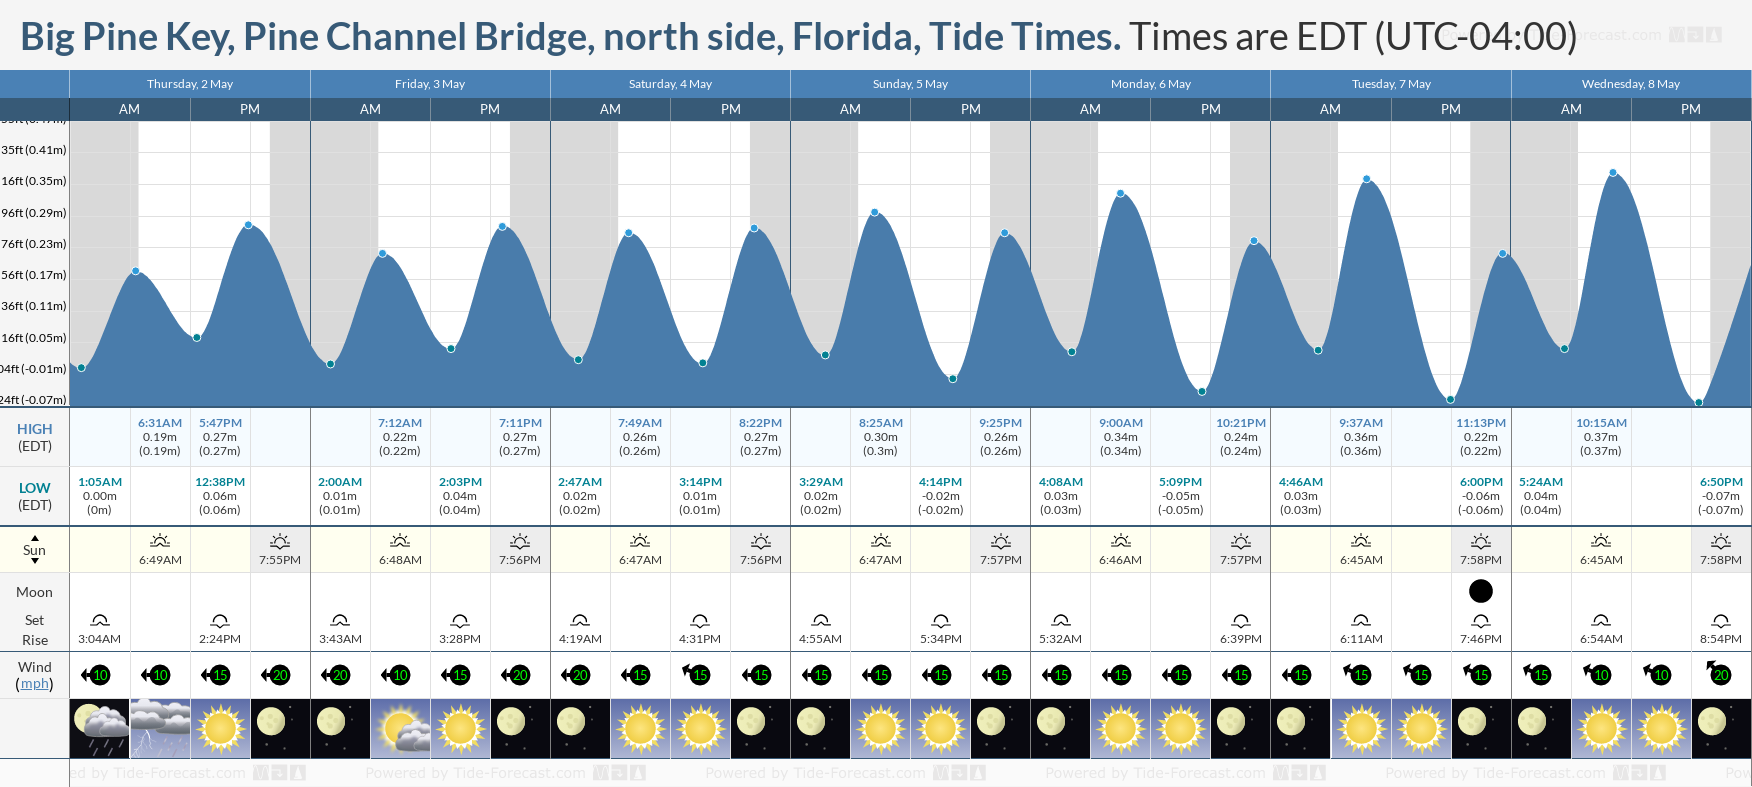 Big Pine Key, Pine Channel Bridge, north side, Florida Tide Chart including high and low tide tide times for the next 7 days